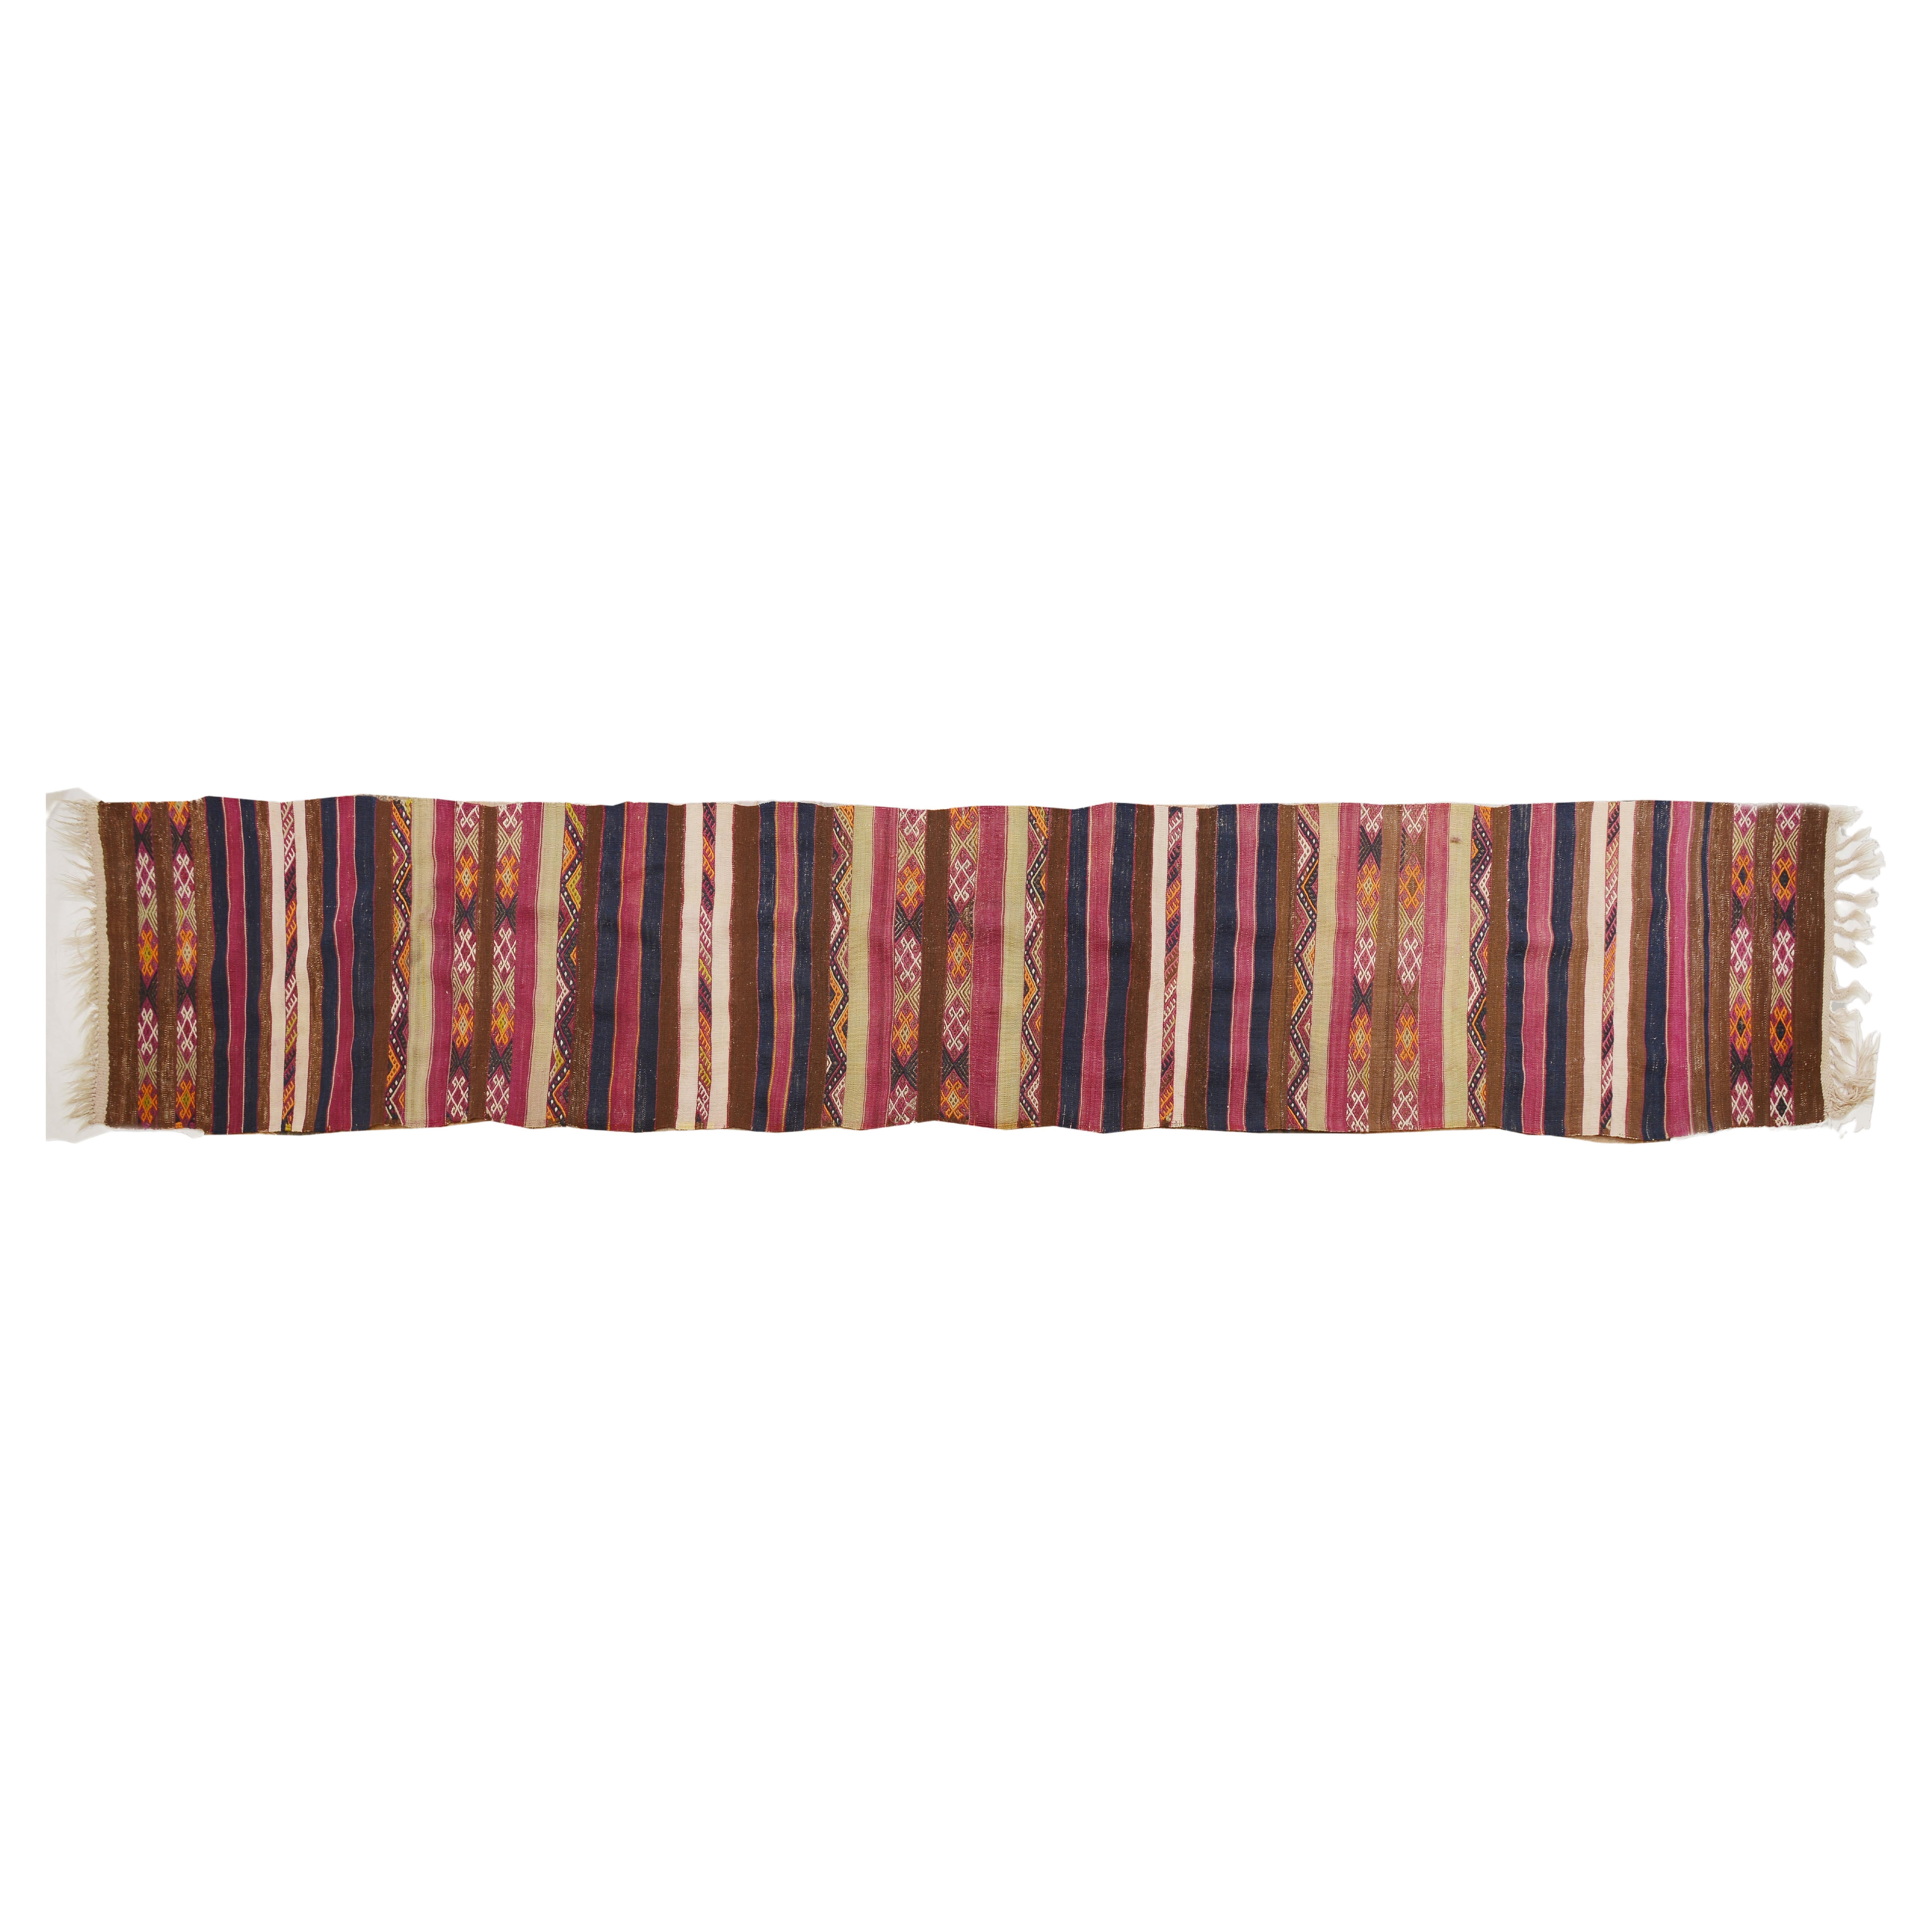 nr. 498 - Light, long, unusual kilim strip or runner , covered with small cicim embroideries.
I would see it placed on a long table or hung on the wall, horizontally or vertically. I don't think it was created to be walked on, if You consider that's